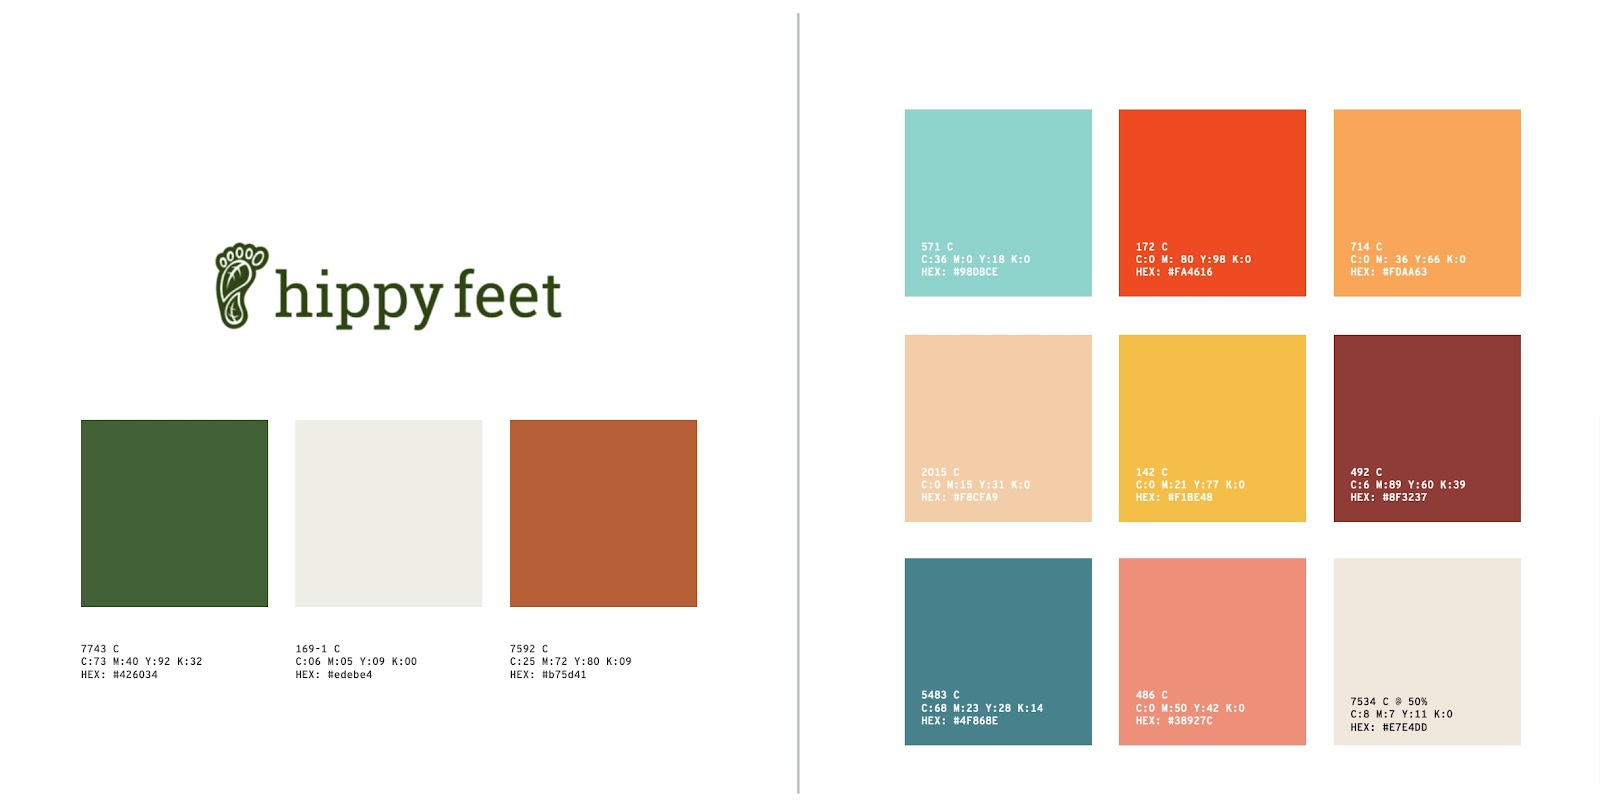 hippy feet color scheme style guide